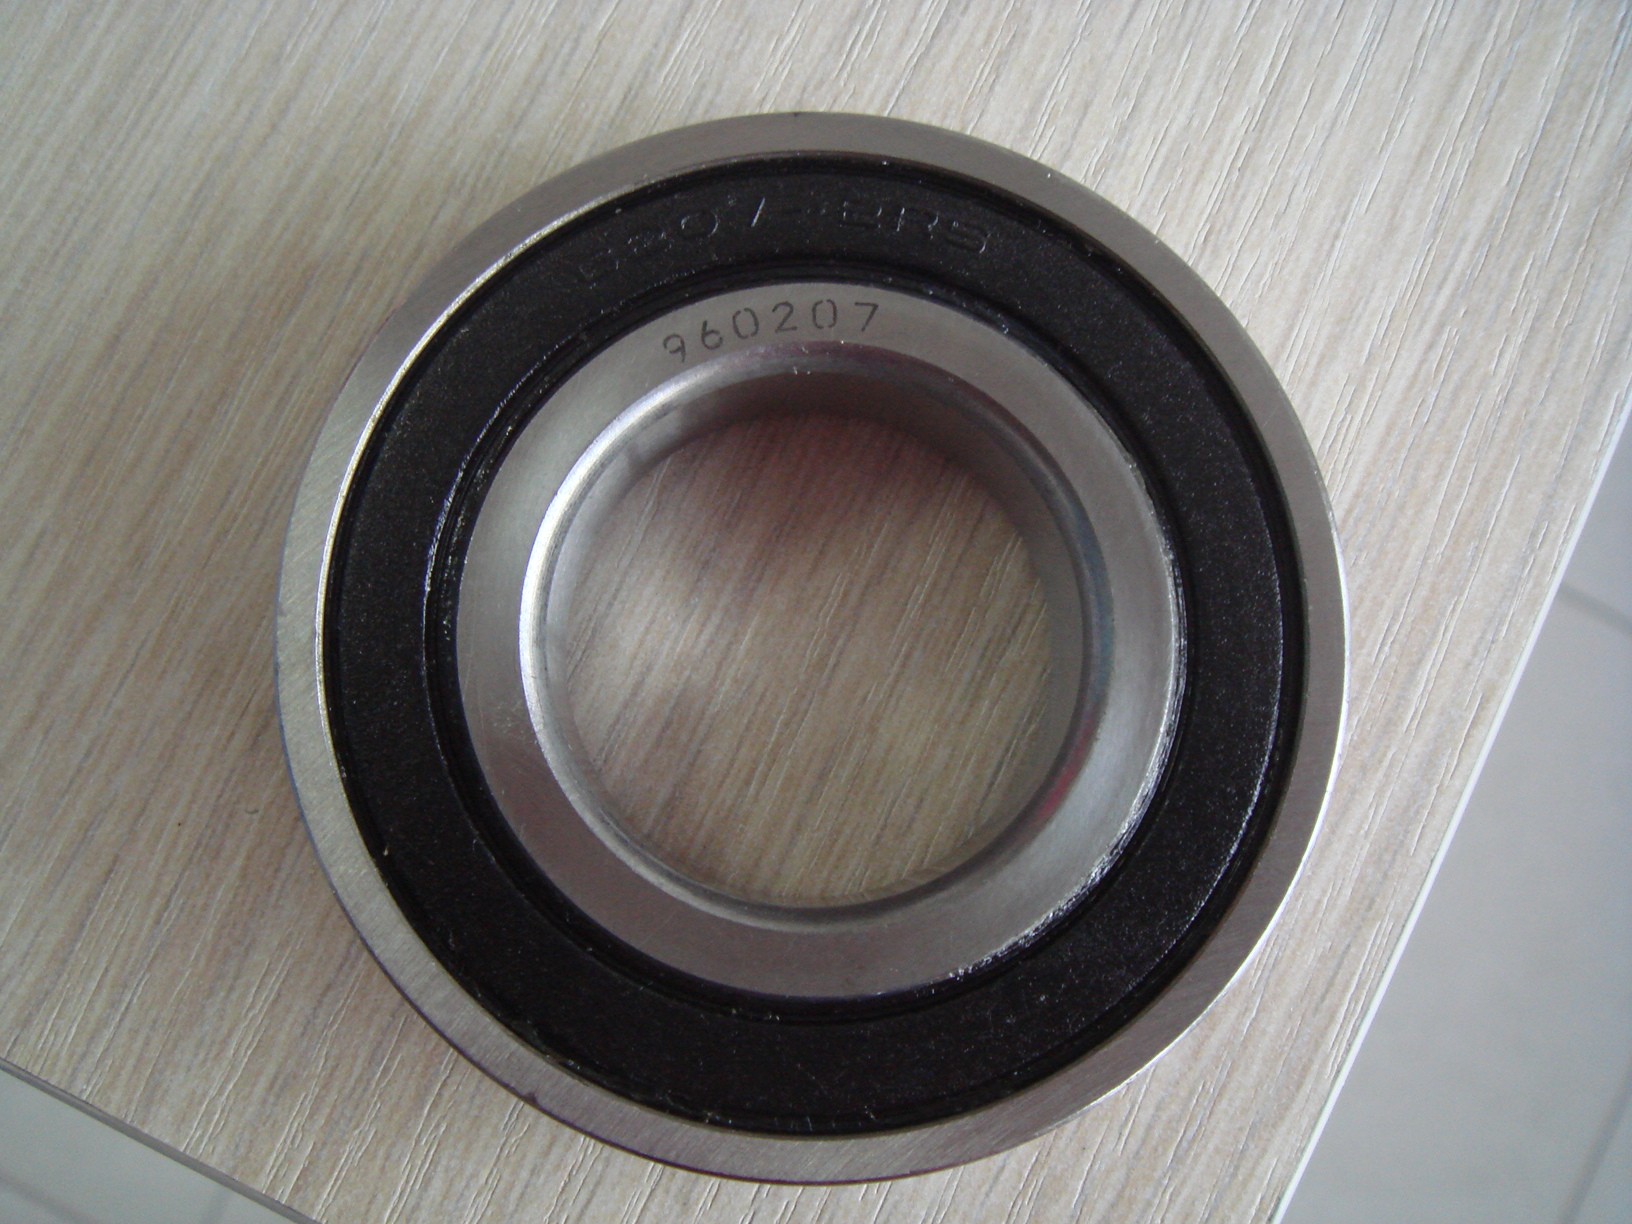 Heavy Duty Large Ball Bearings 6036 Manufacturers, Heavy Duty Large Ball Bearings 6036 Factory, Supply Heavy Duty Large Ball Bearings 6036